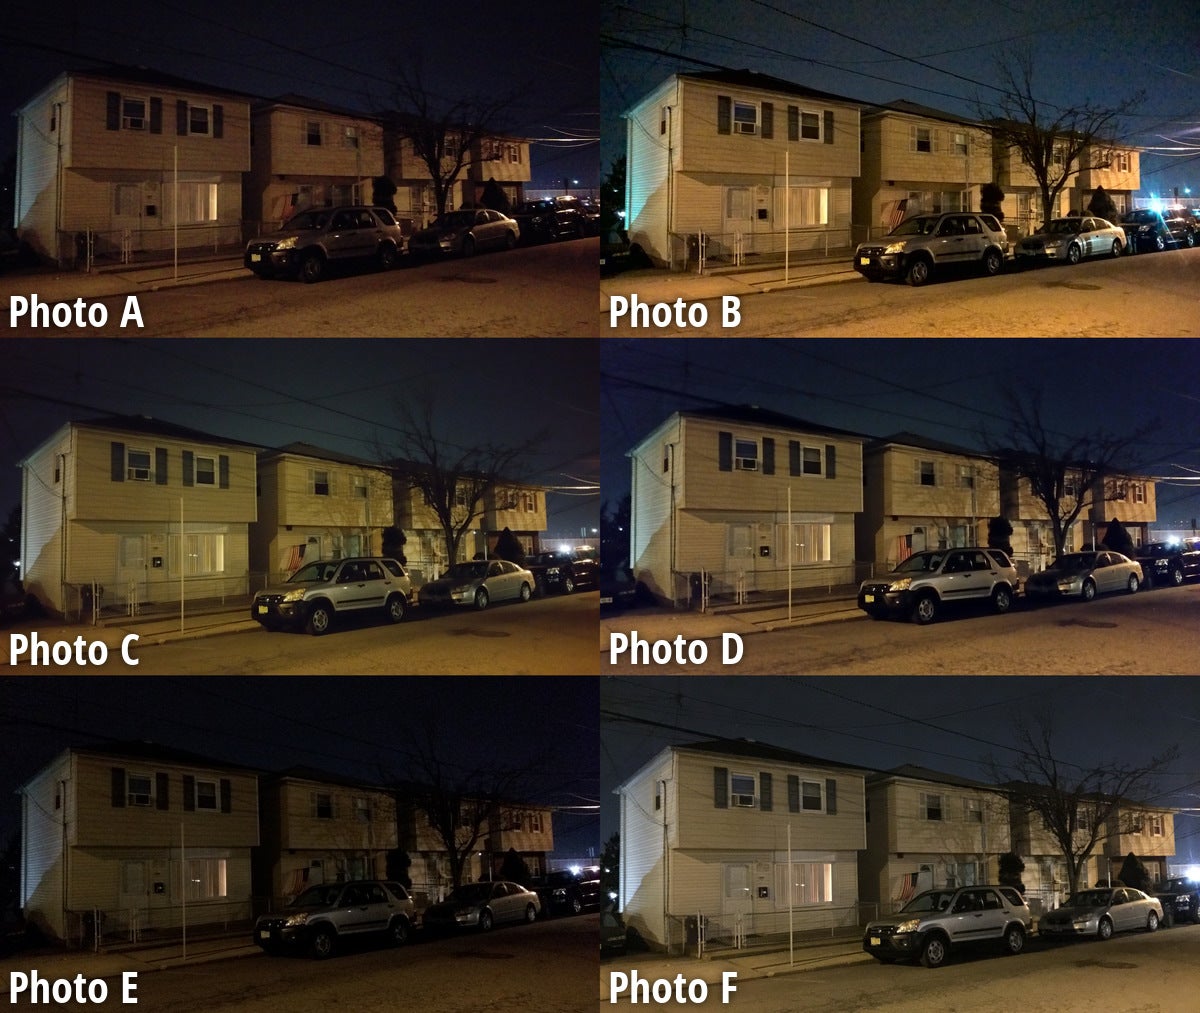 Side-by-side preview - HTC One M9 vs iPhone 6 Plus, Samsung Galaxy Note 4, Galaxy S5, Nexus 6, Lumia 930 blind camera comparison: vote here